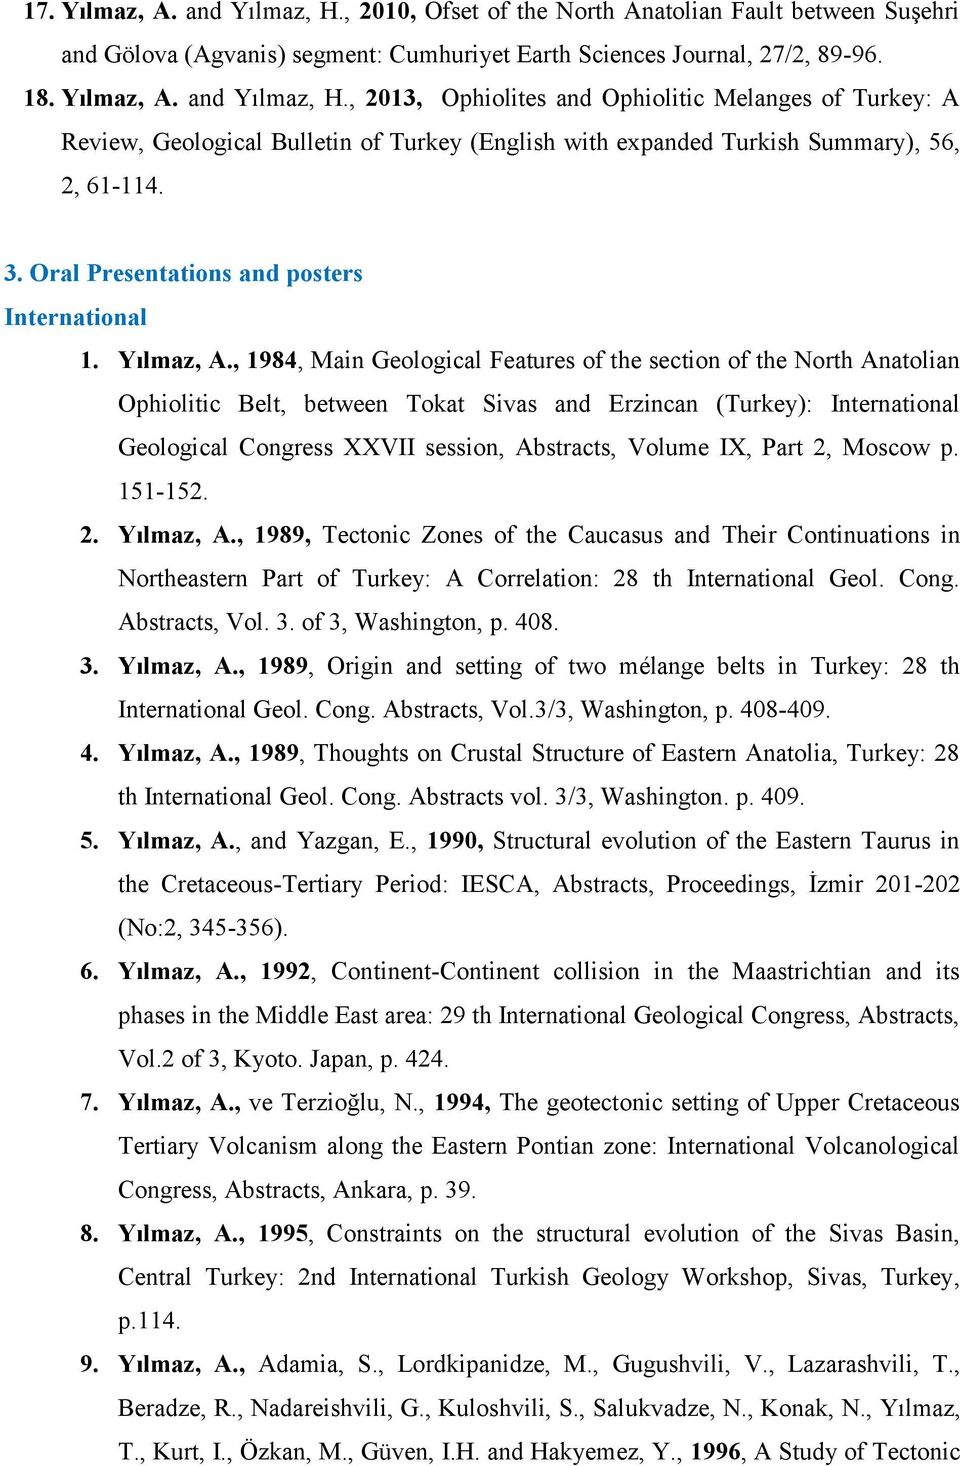 , 1984, Main Geological Features of the section of the North Anatolian Ophiolitic Belt, between Tokat Sivas and Erzincan (Turkey): International Geological Congress XXVII session, Abstracts, Volume